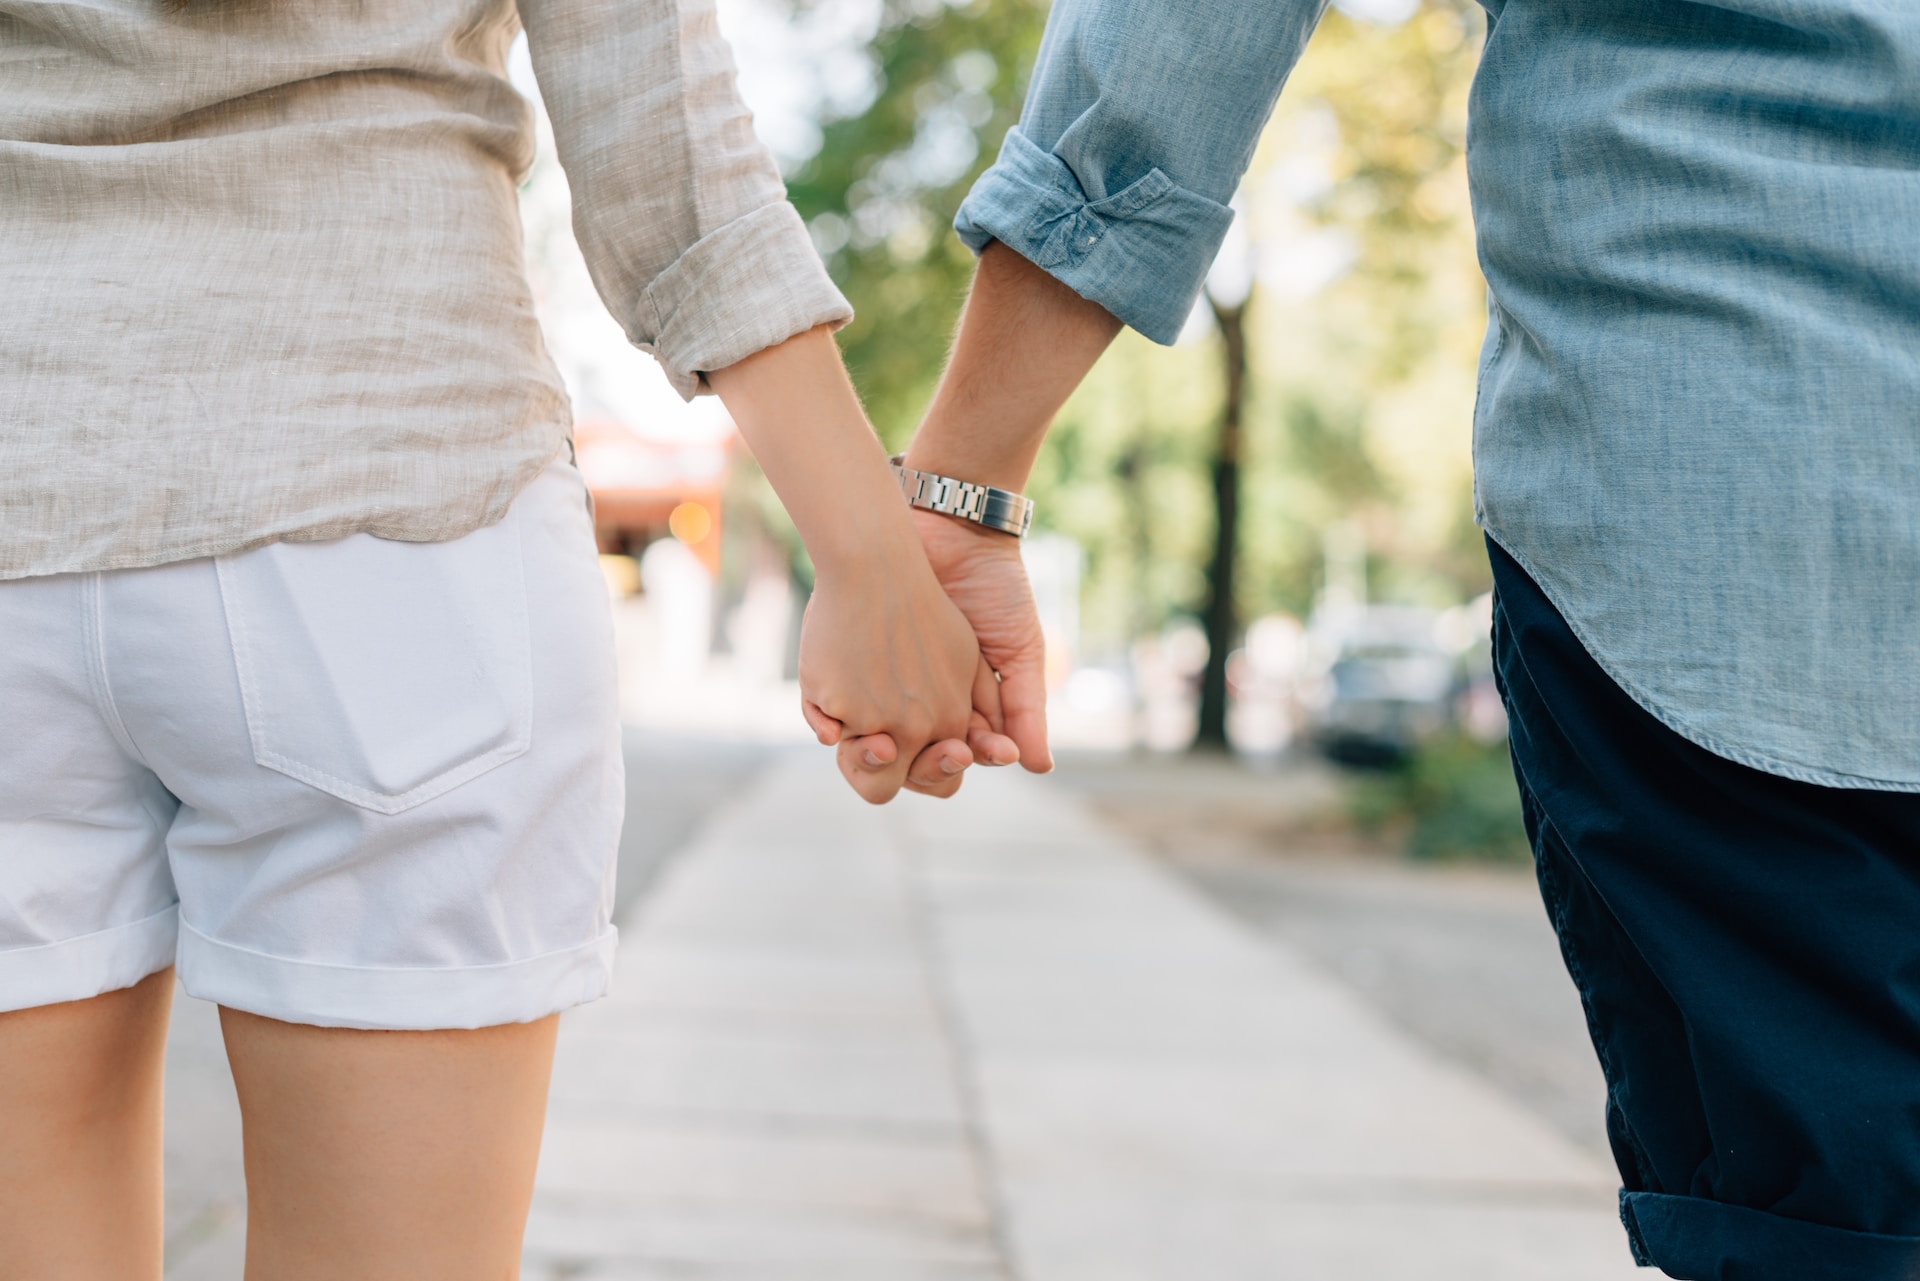 Couple, Love Images, Hands, Holding Hands, Hand, Together, Man, Relationship, Date, Walk, Romance, Outdoors, Human